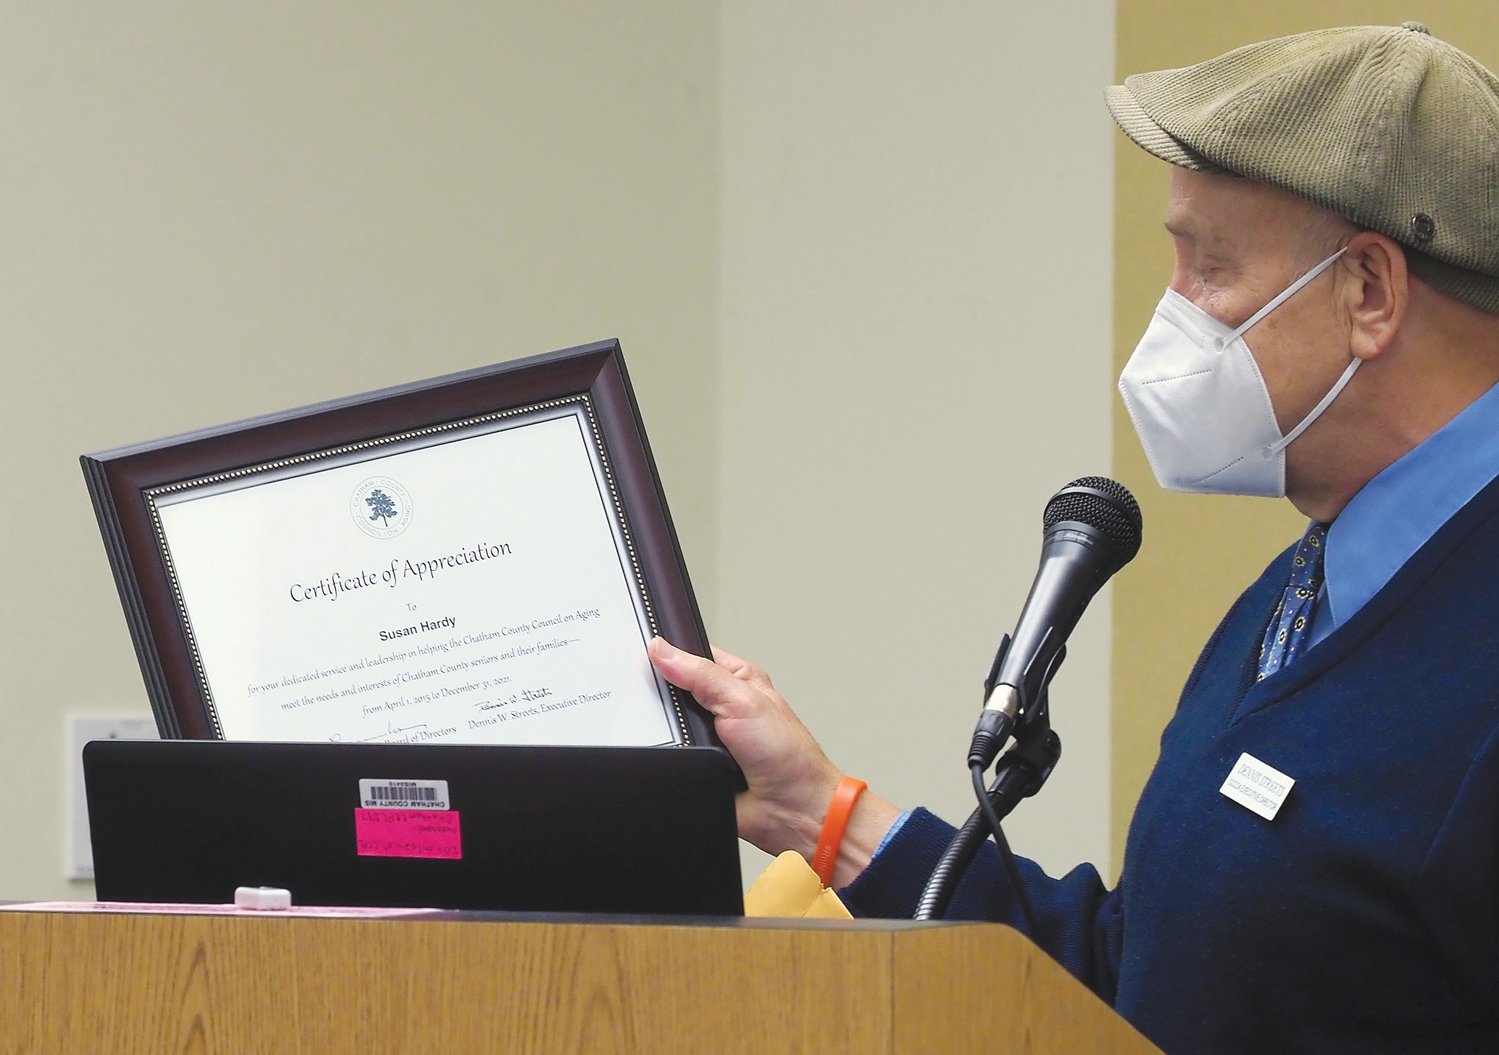 Chatham County Council on Aging Director Dennis Streets reads a certificate of appreciation for Susan Hardy at last Thursday's retirement event in Pittsboro.